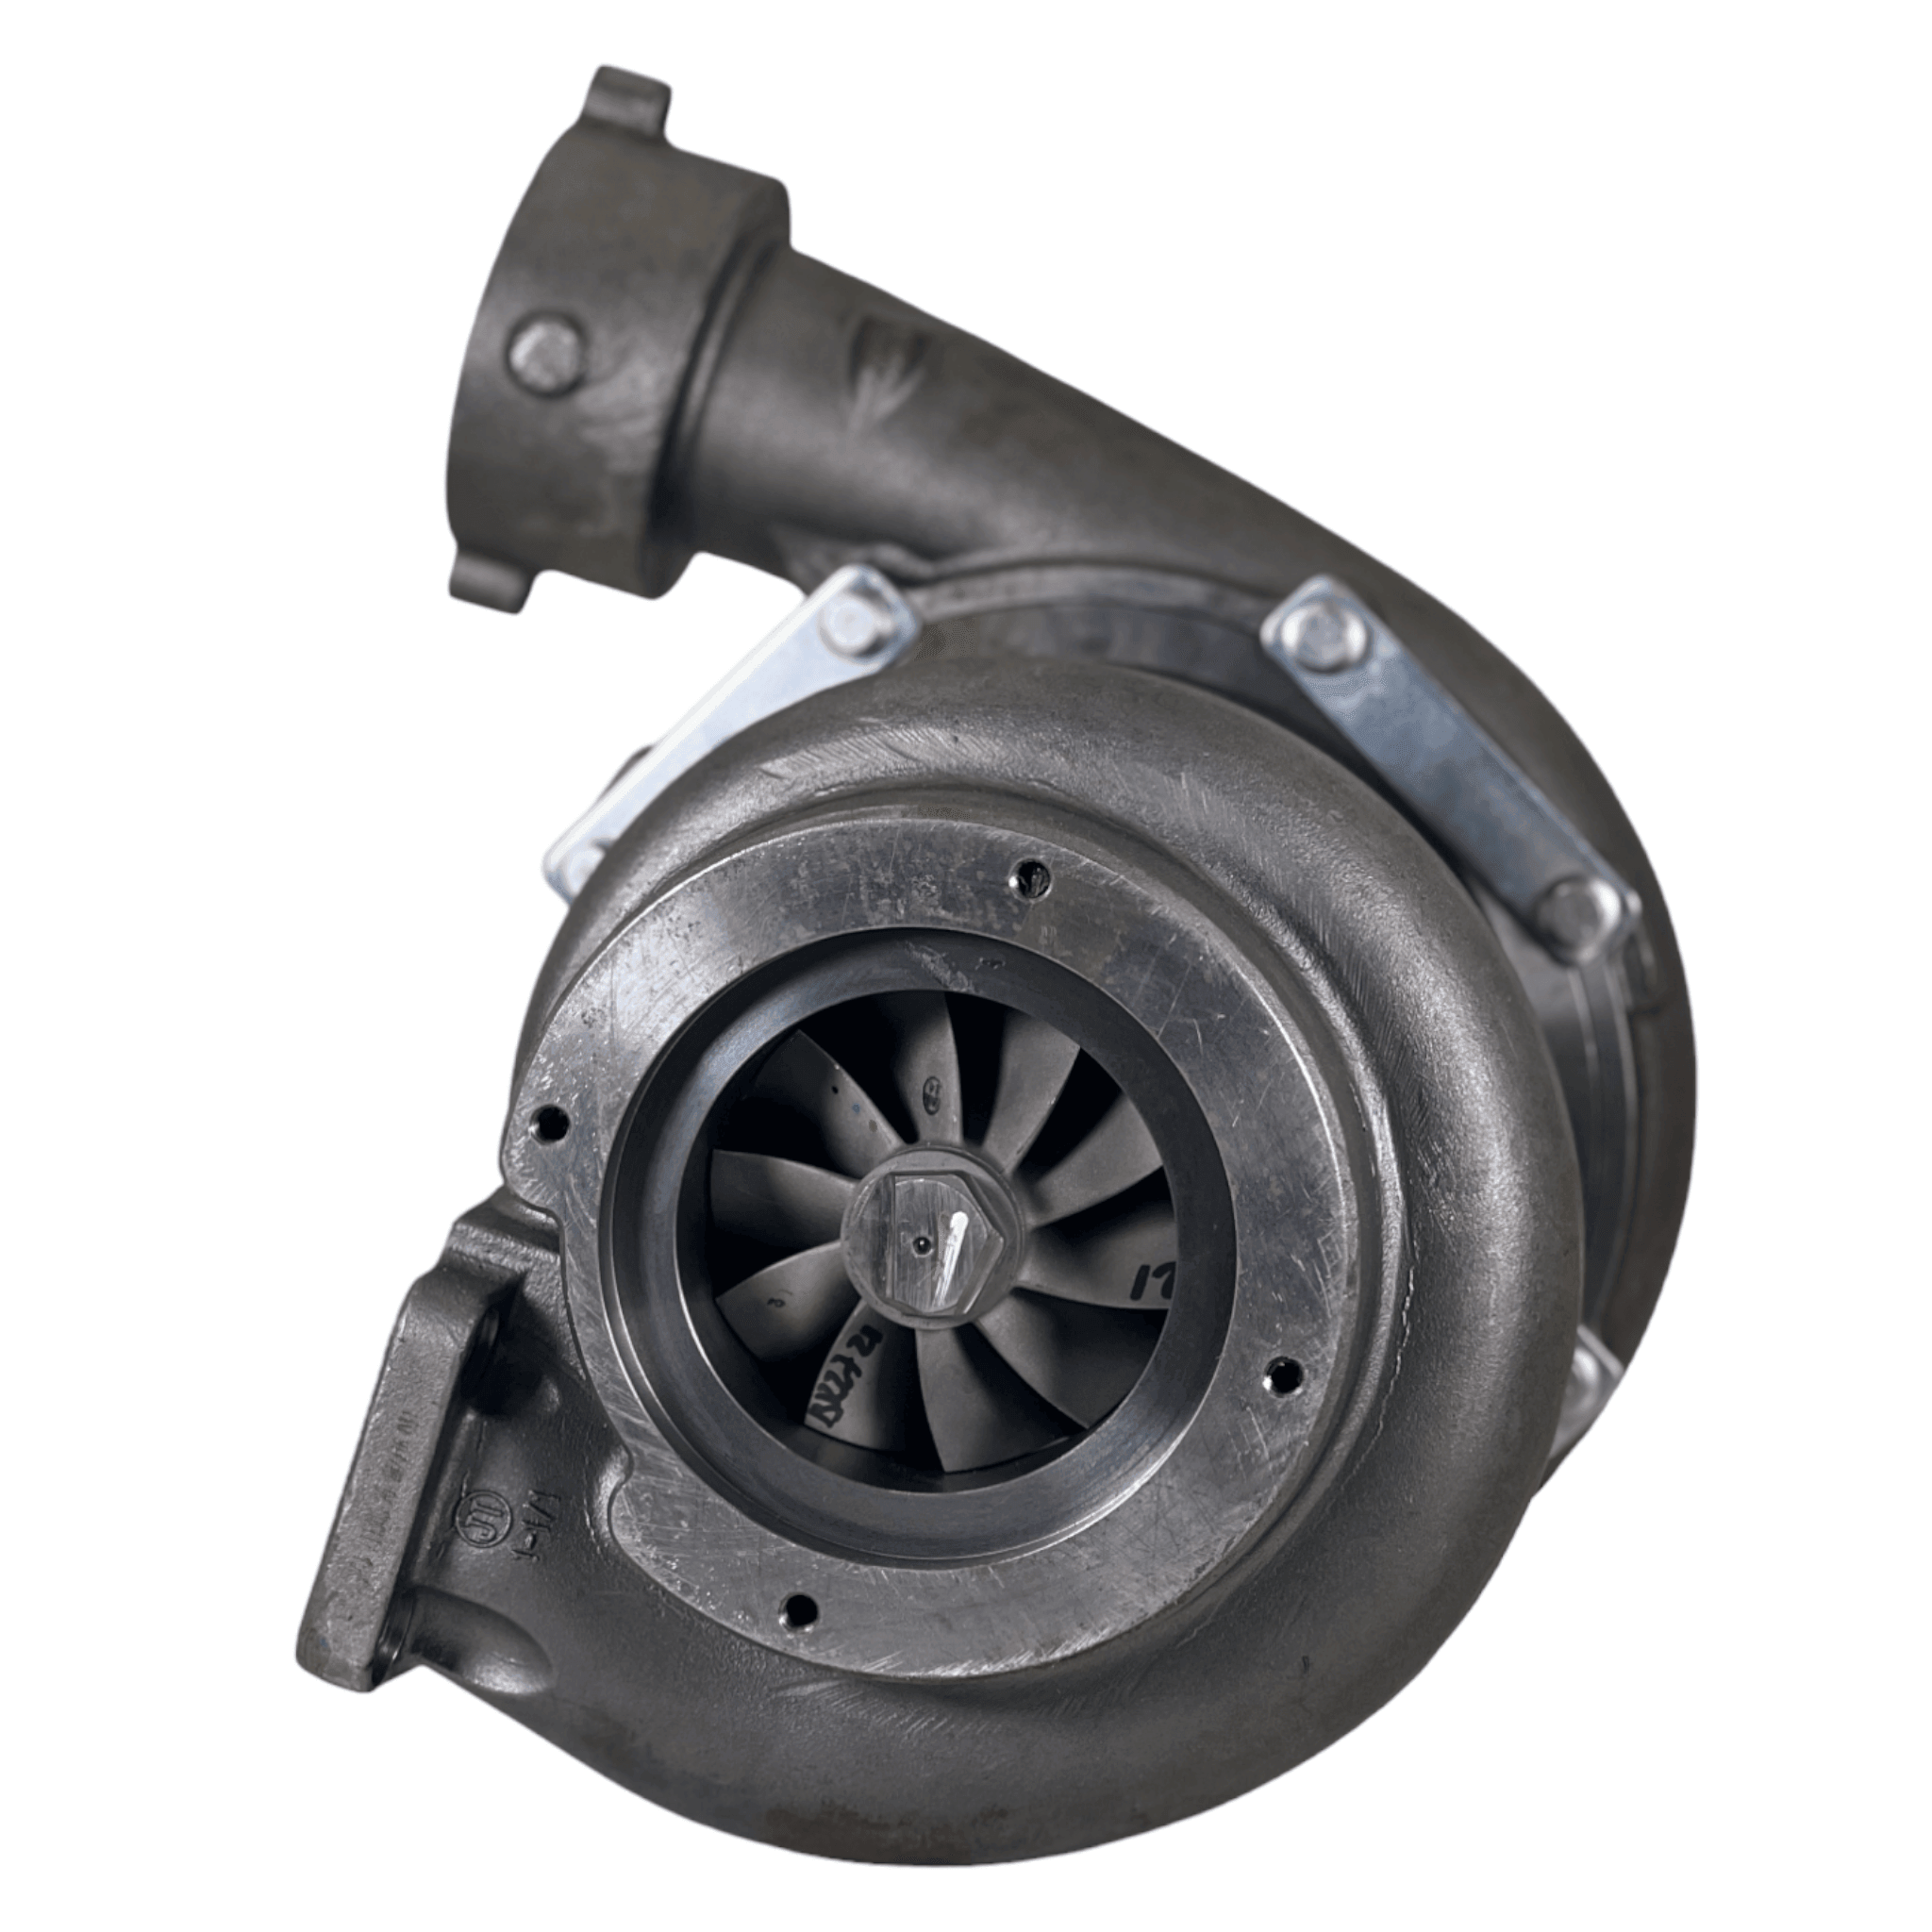 CA3930358 Genuine Cat Turbocharger For Caterpillar G3508/ G3516 Engines - ADVANCED TRUCK PARTS